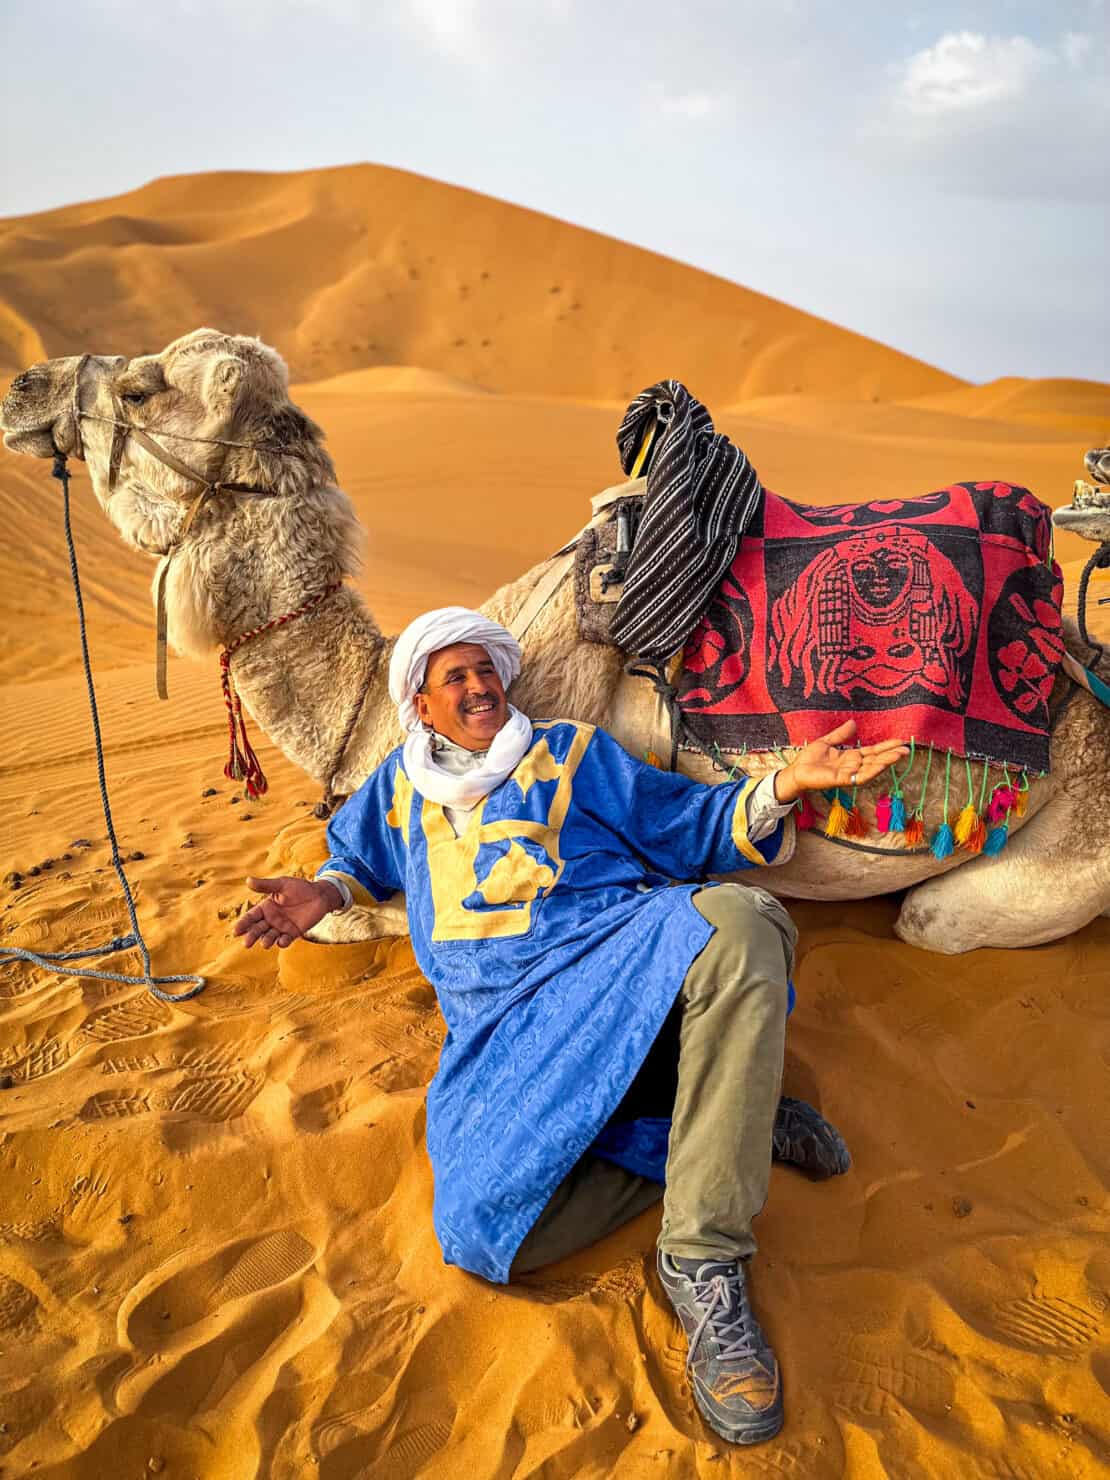 Relaxed Berber man with camel at the Erg Chebbi dunes in Morocco